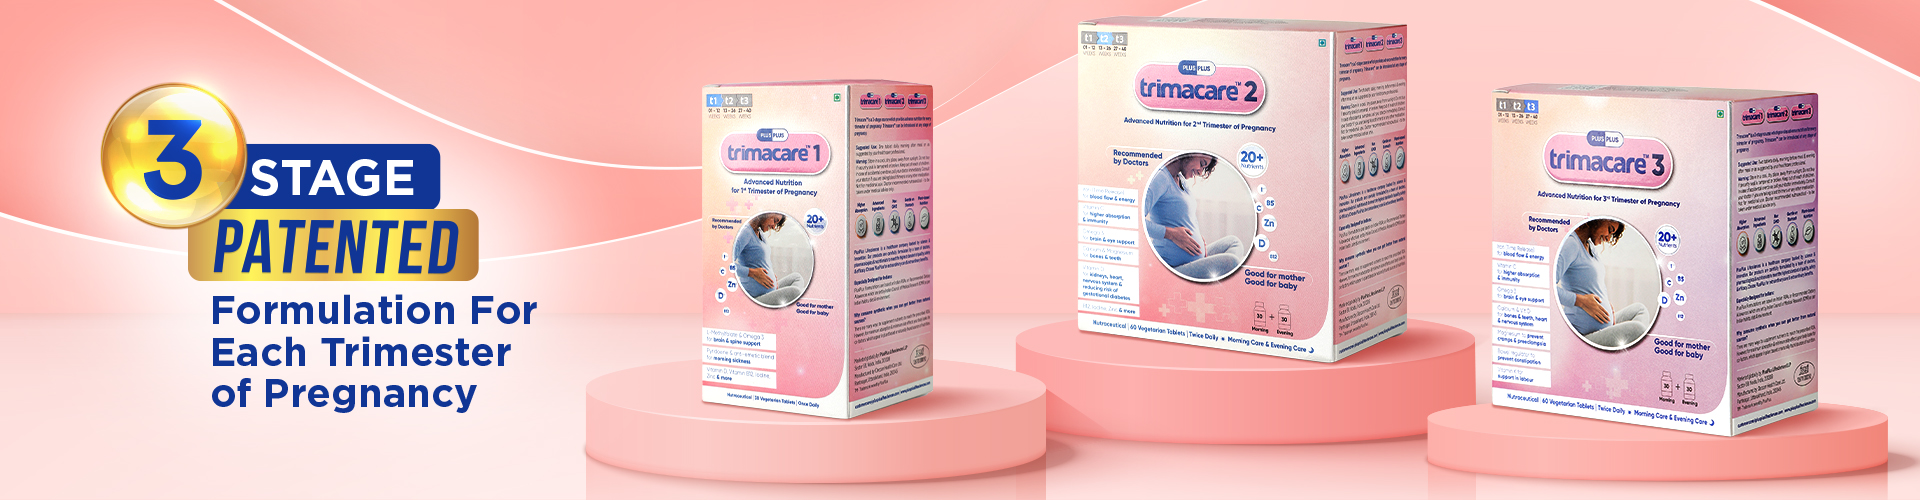 Three boxes of Trimacare, labeled 3 stage patented